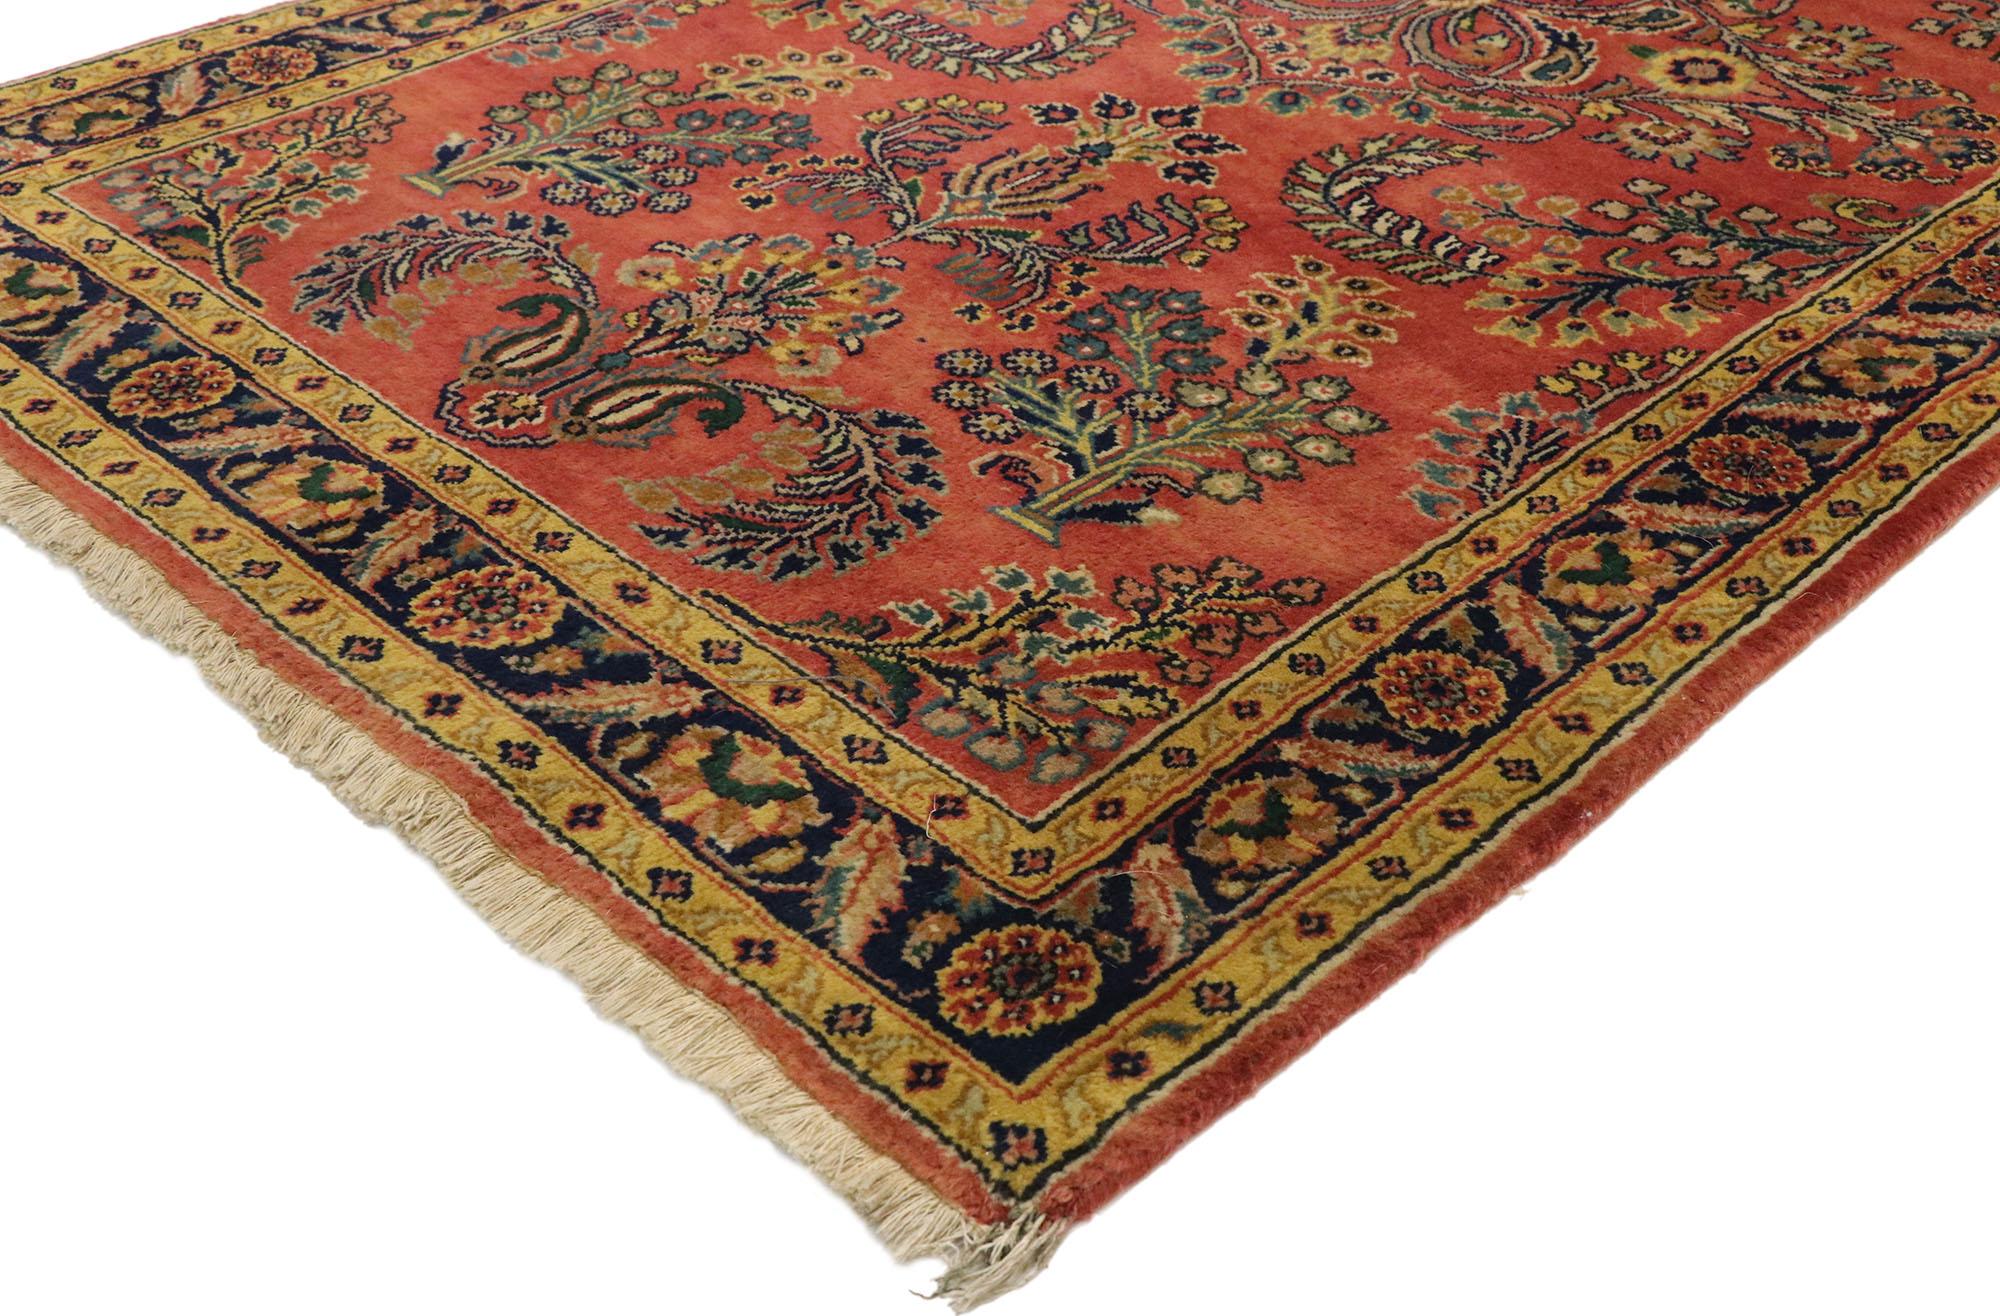 77522, vintage Persian Floral Sarouk rug with Traditional English Tudor style. With timeless appeal, refined colors, and architectural design elements, this hand knotted wool vintage Persian Sarouk rug can beautifully blend modern, traditional,